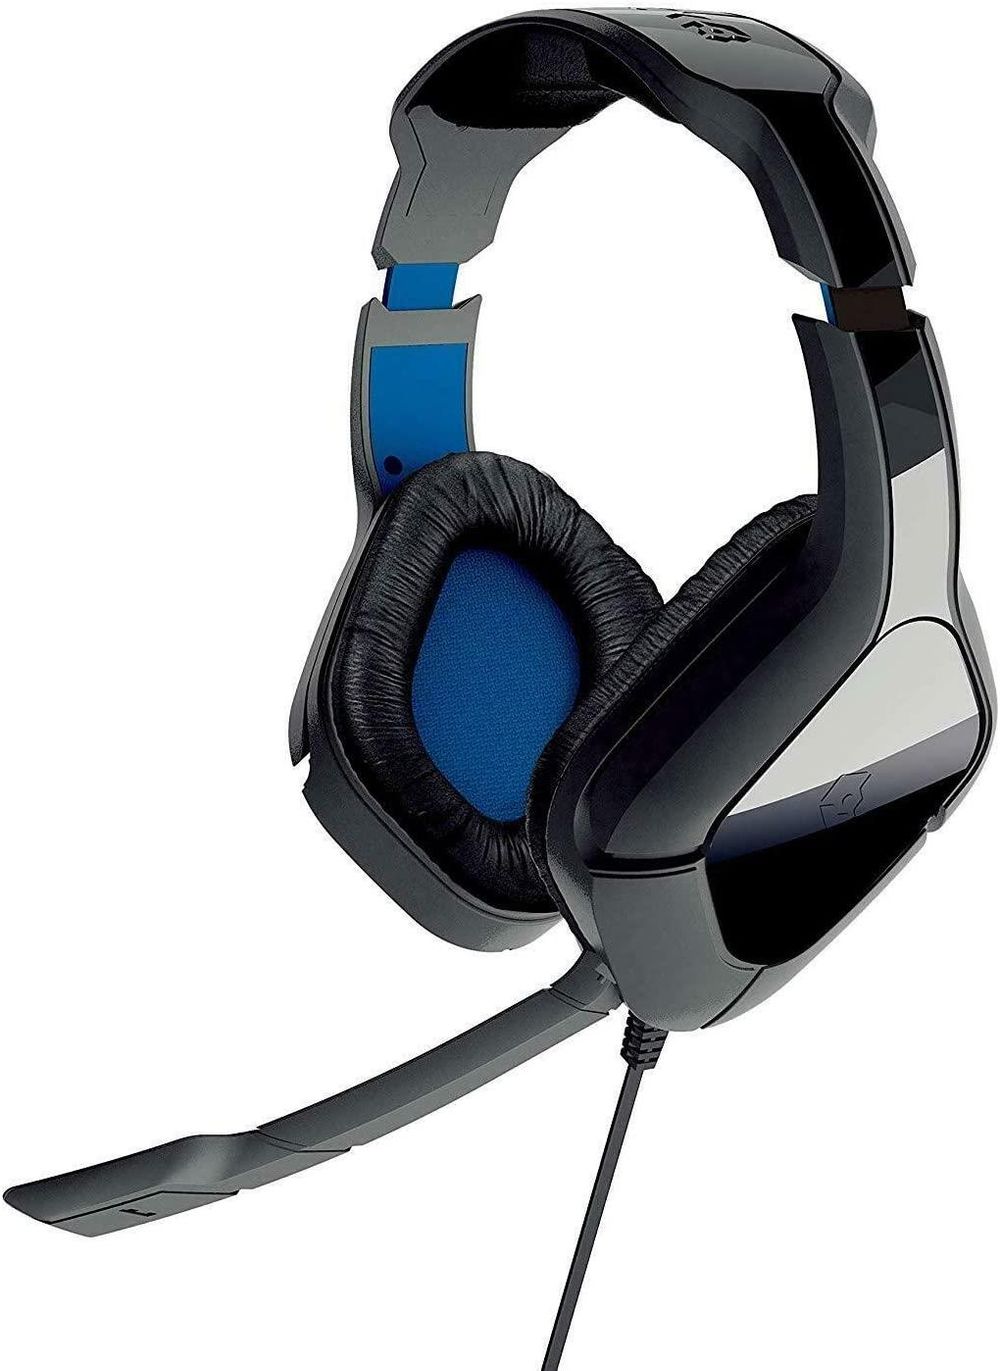 Gioteck HC-P4 Stereo Gaming Headset (PS4, Xbox One, PC, Mac)- Blue